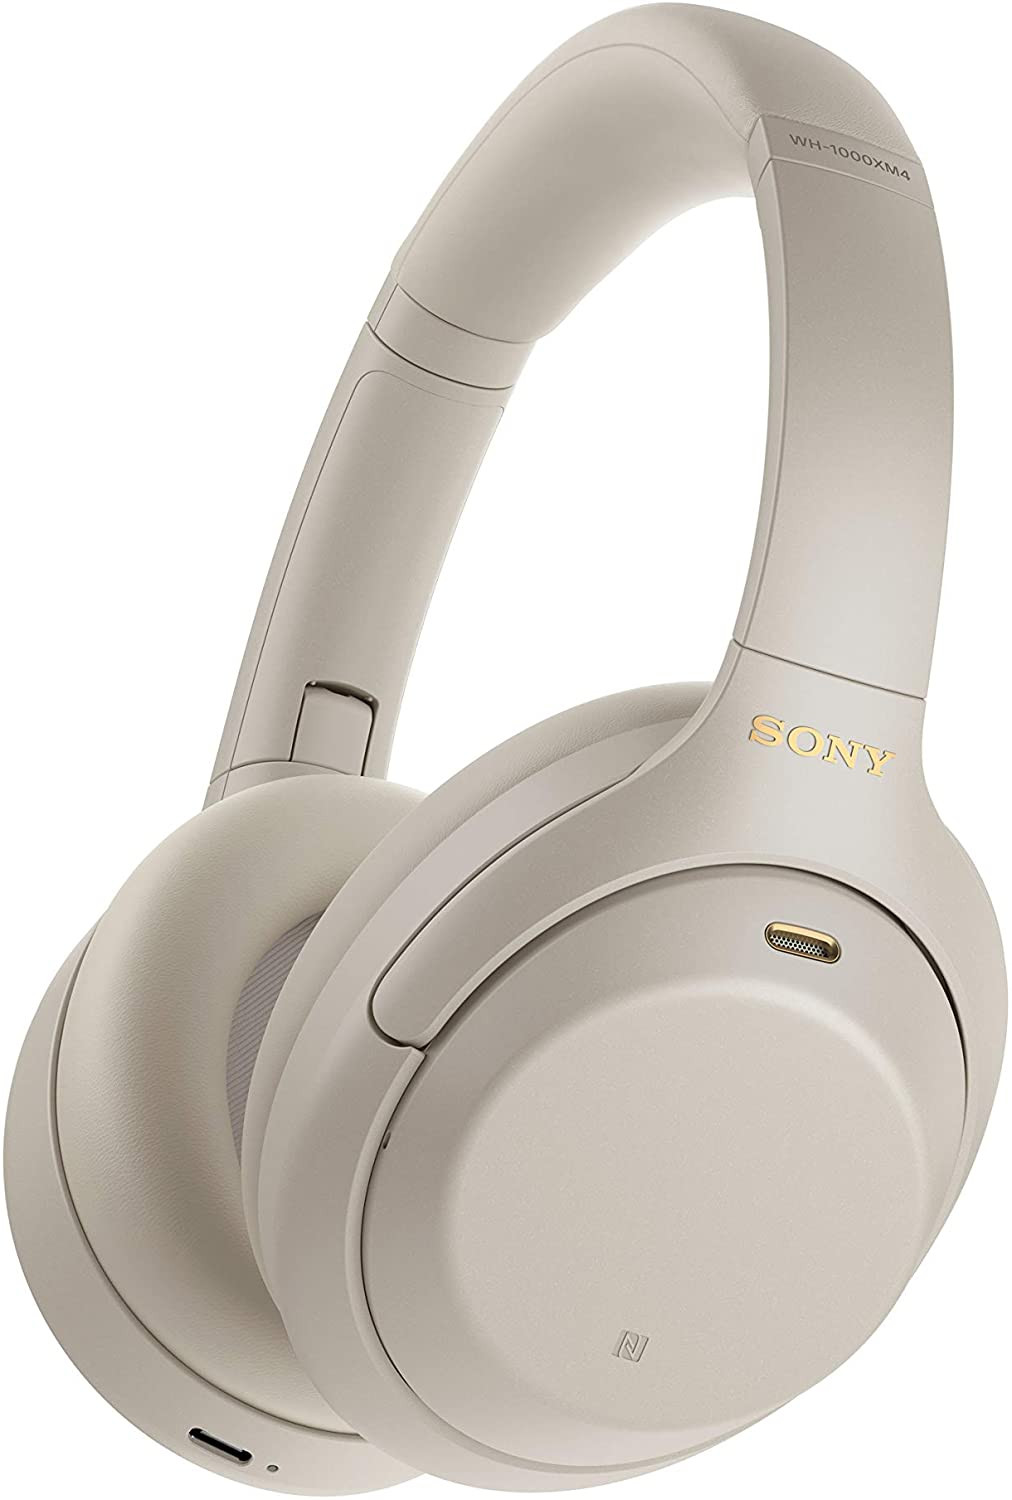 Sony WH-1000X M4 Wireless Noise-Canceling Headphone Silver